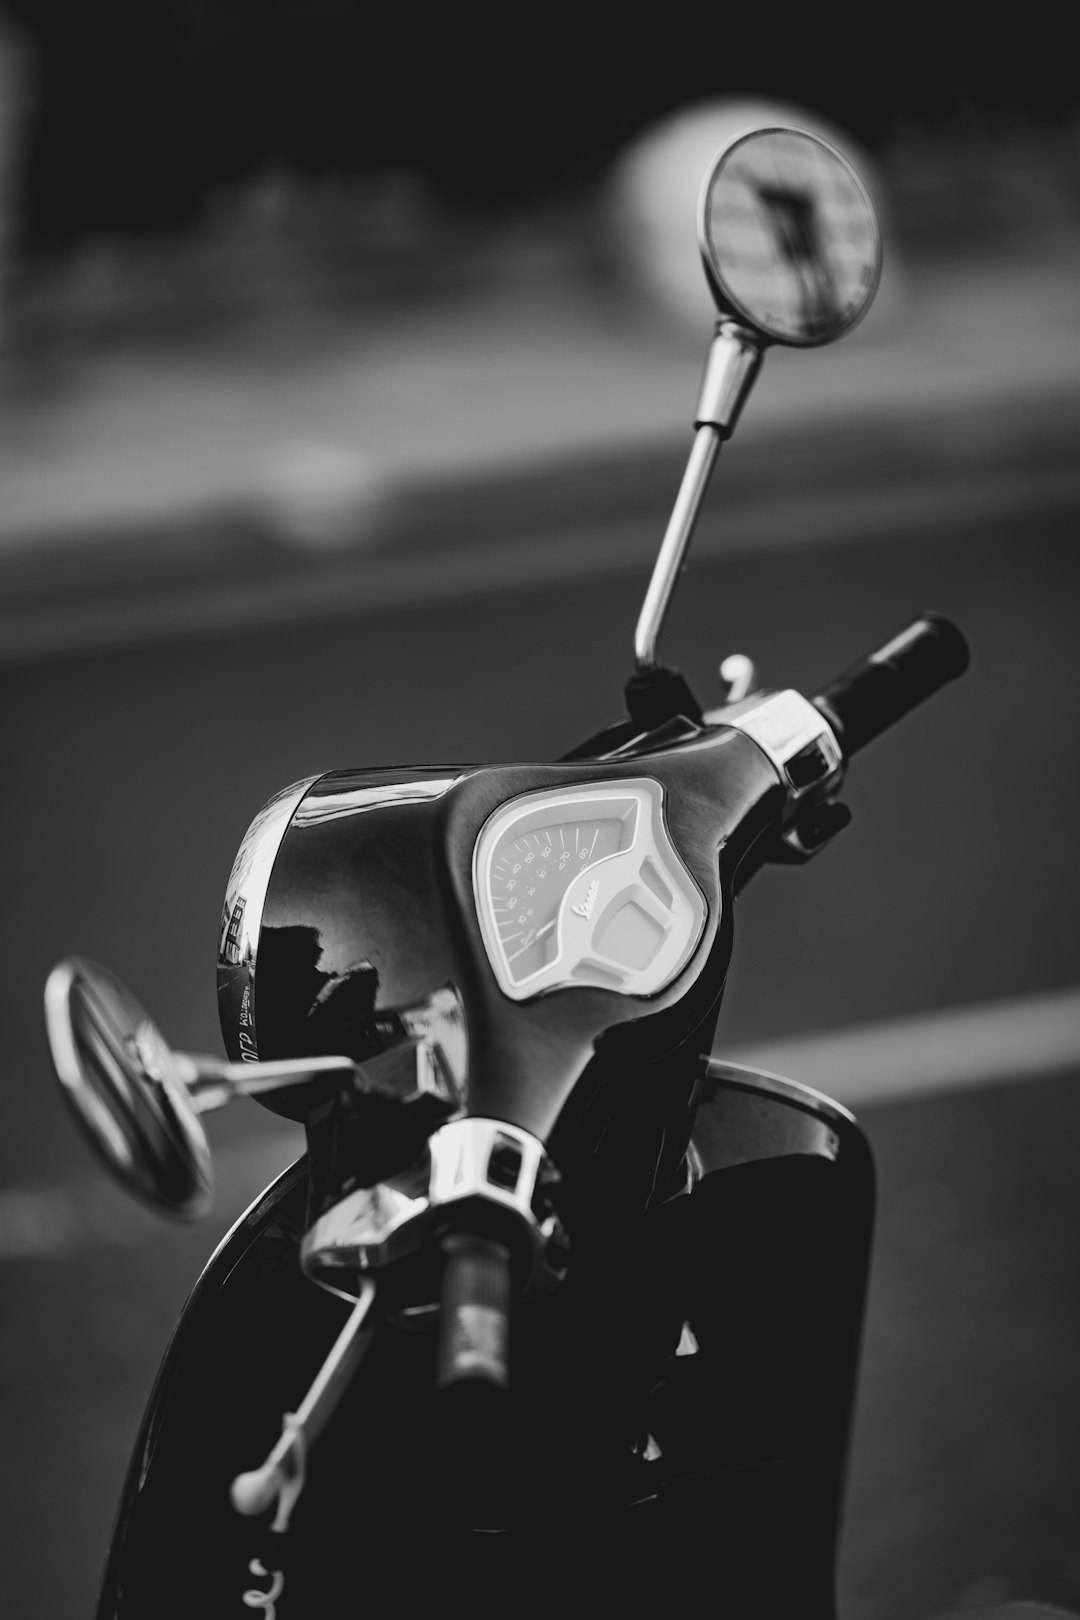 grayscale photo of motorcycle gear shift lever